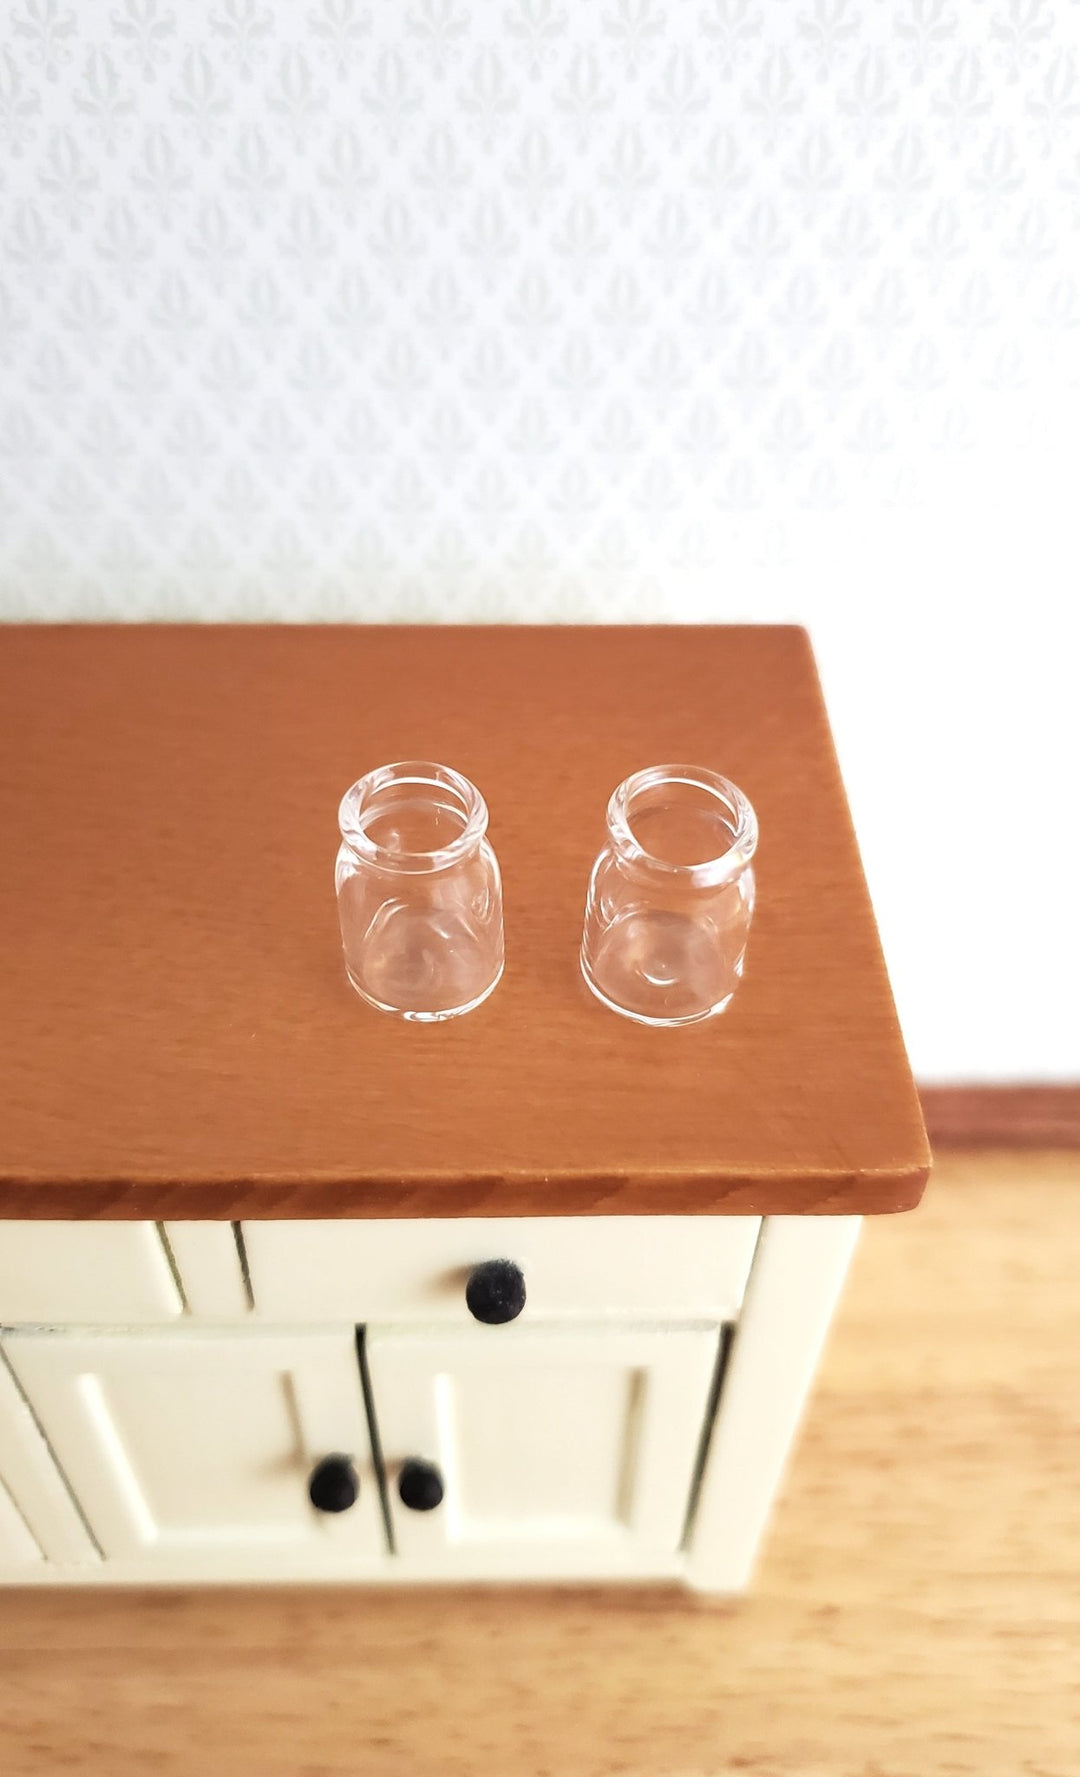 Dollhouse Miniature Empty Glass Jars Open Top Set of 2 for Canning or Treats 1:12 Scale - Miniature Crush